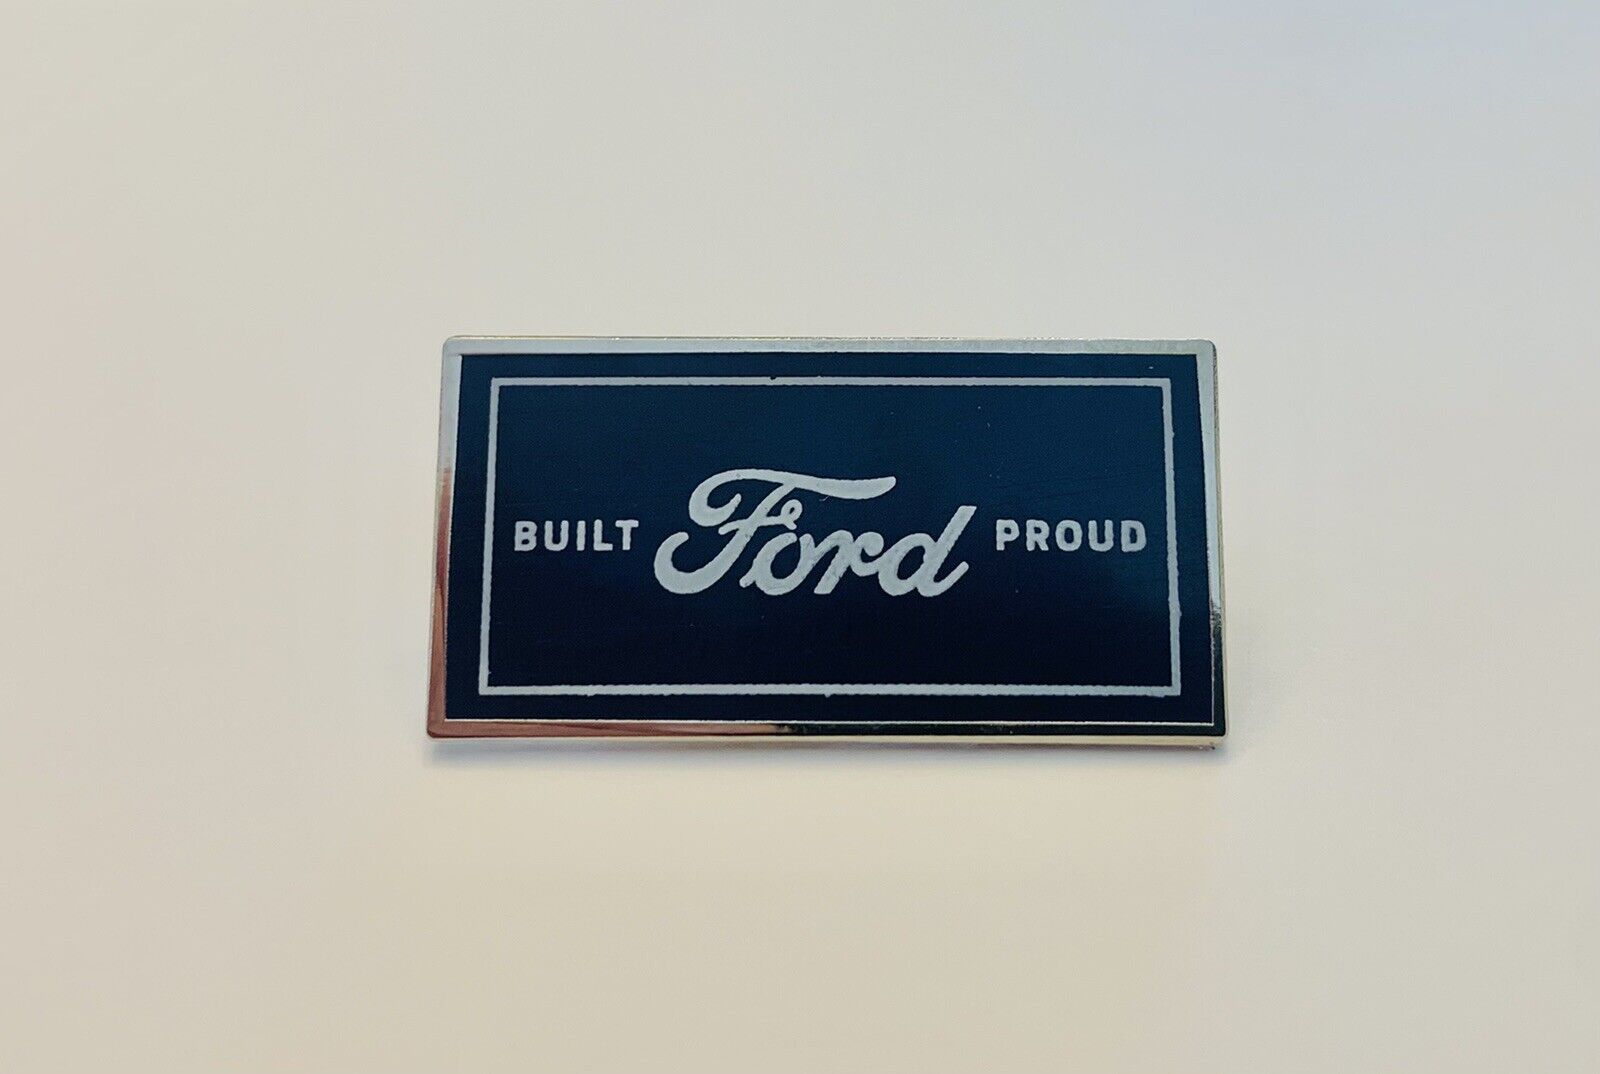 Ford ”Built Ford Proud” Hat or Lapel Pin.